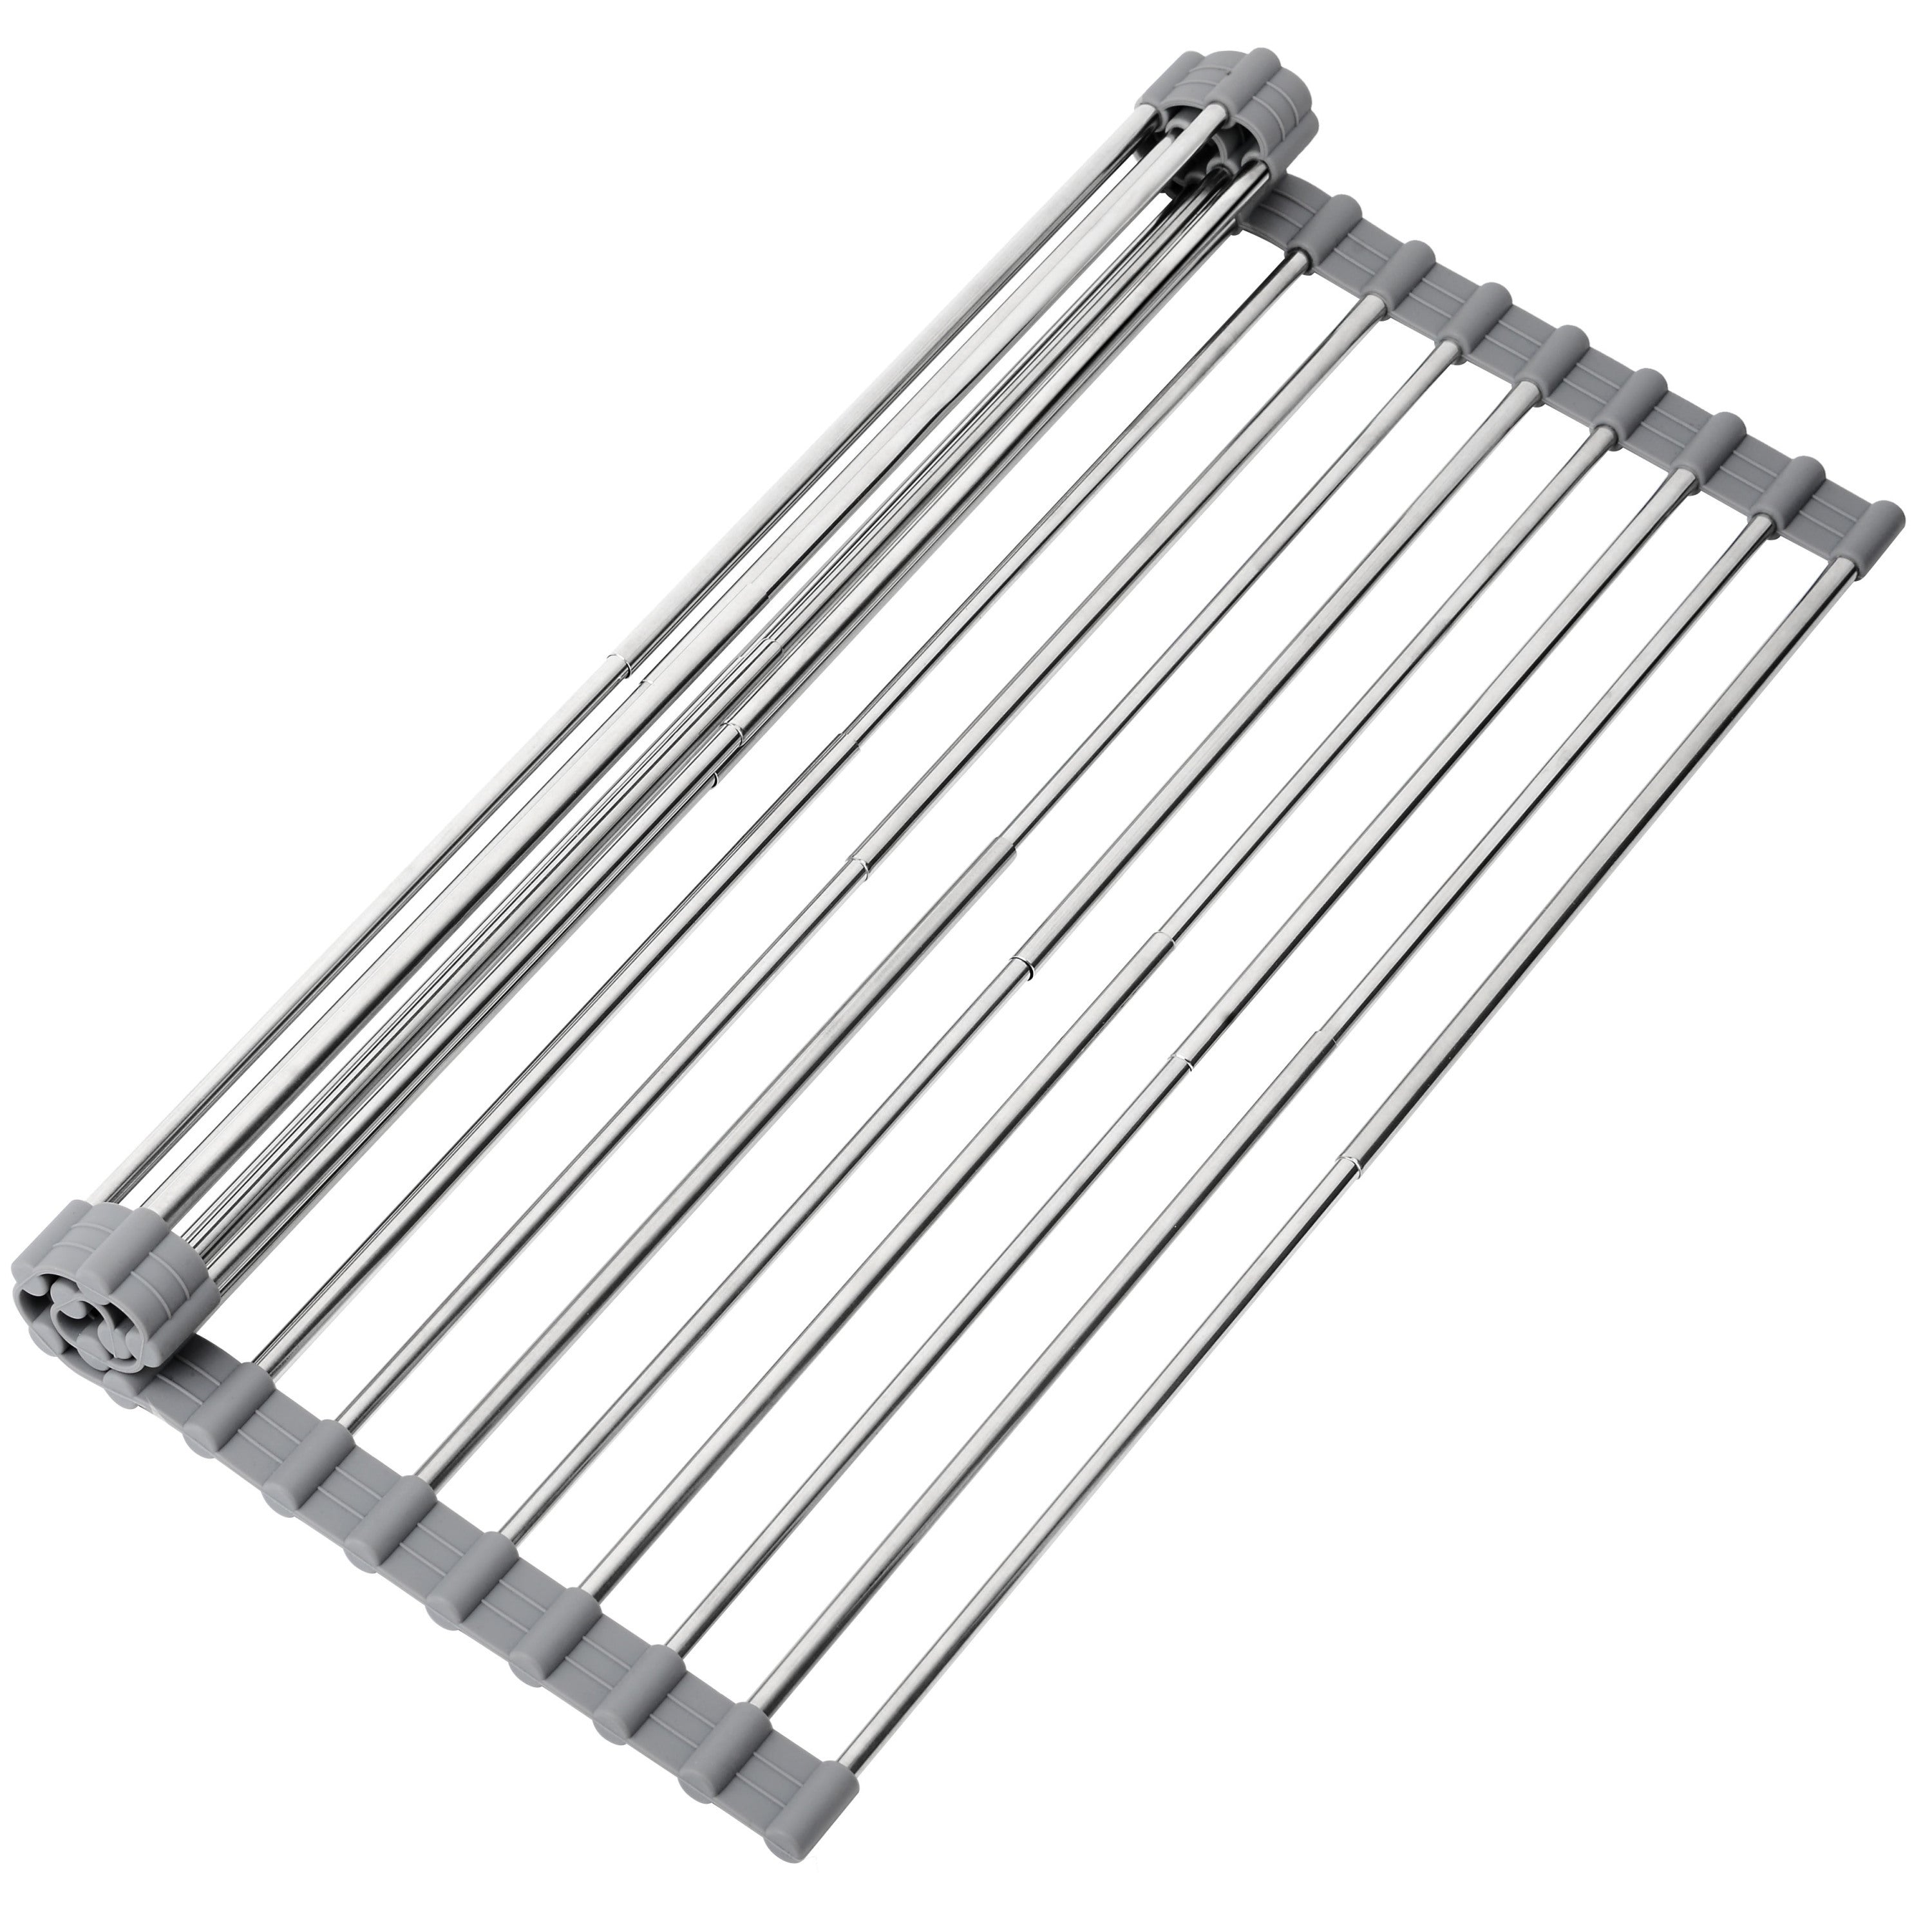 Stainless SteelFoldable Retractable Kitchen Sink Dish Rack